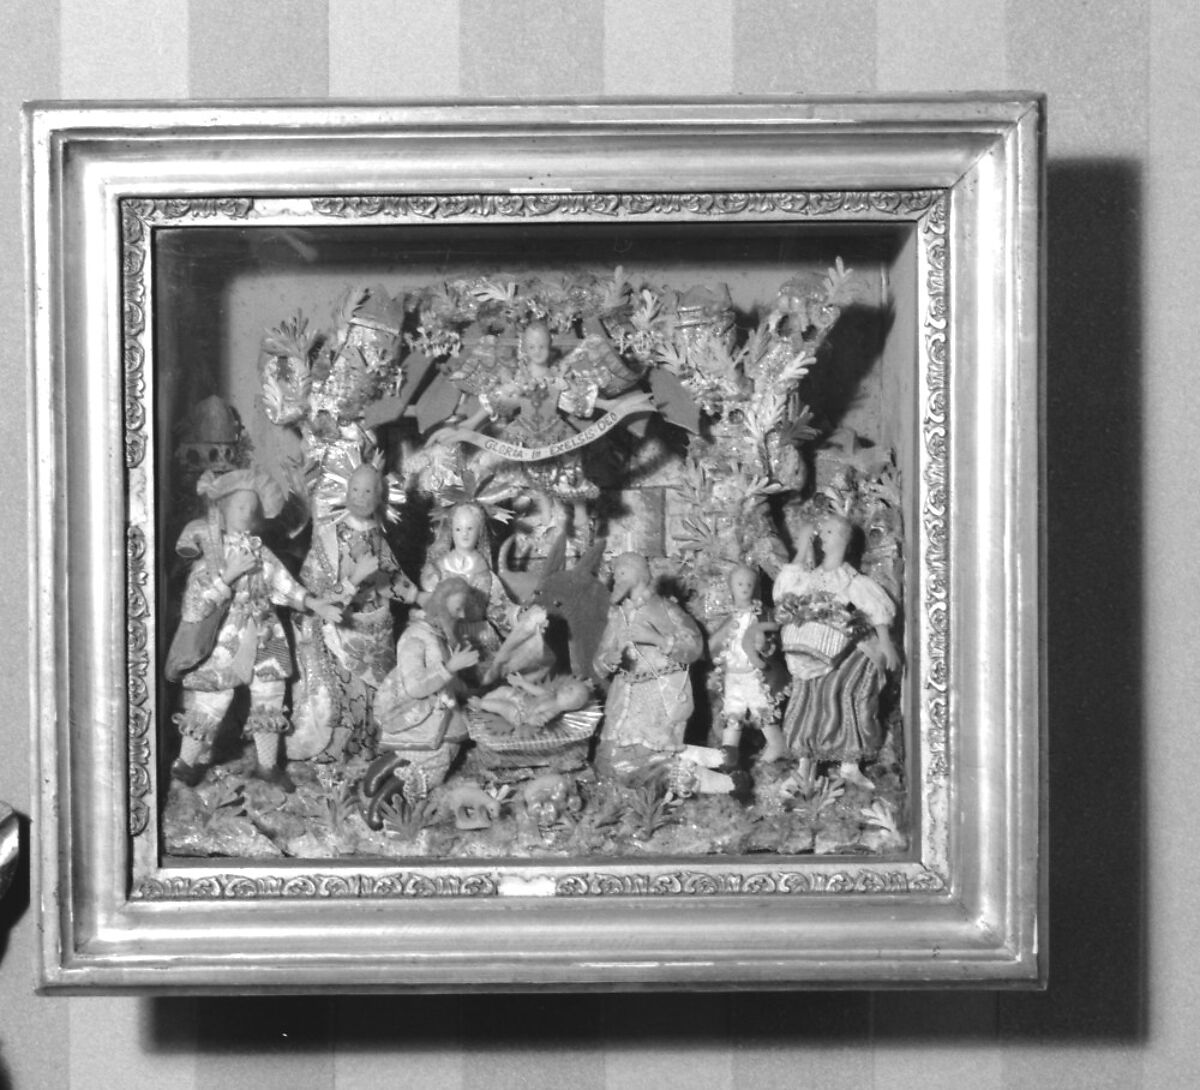 Nativity and The Adoration of the Shepherds, Wax, fabric, glass, possibly French, Provence 